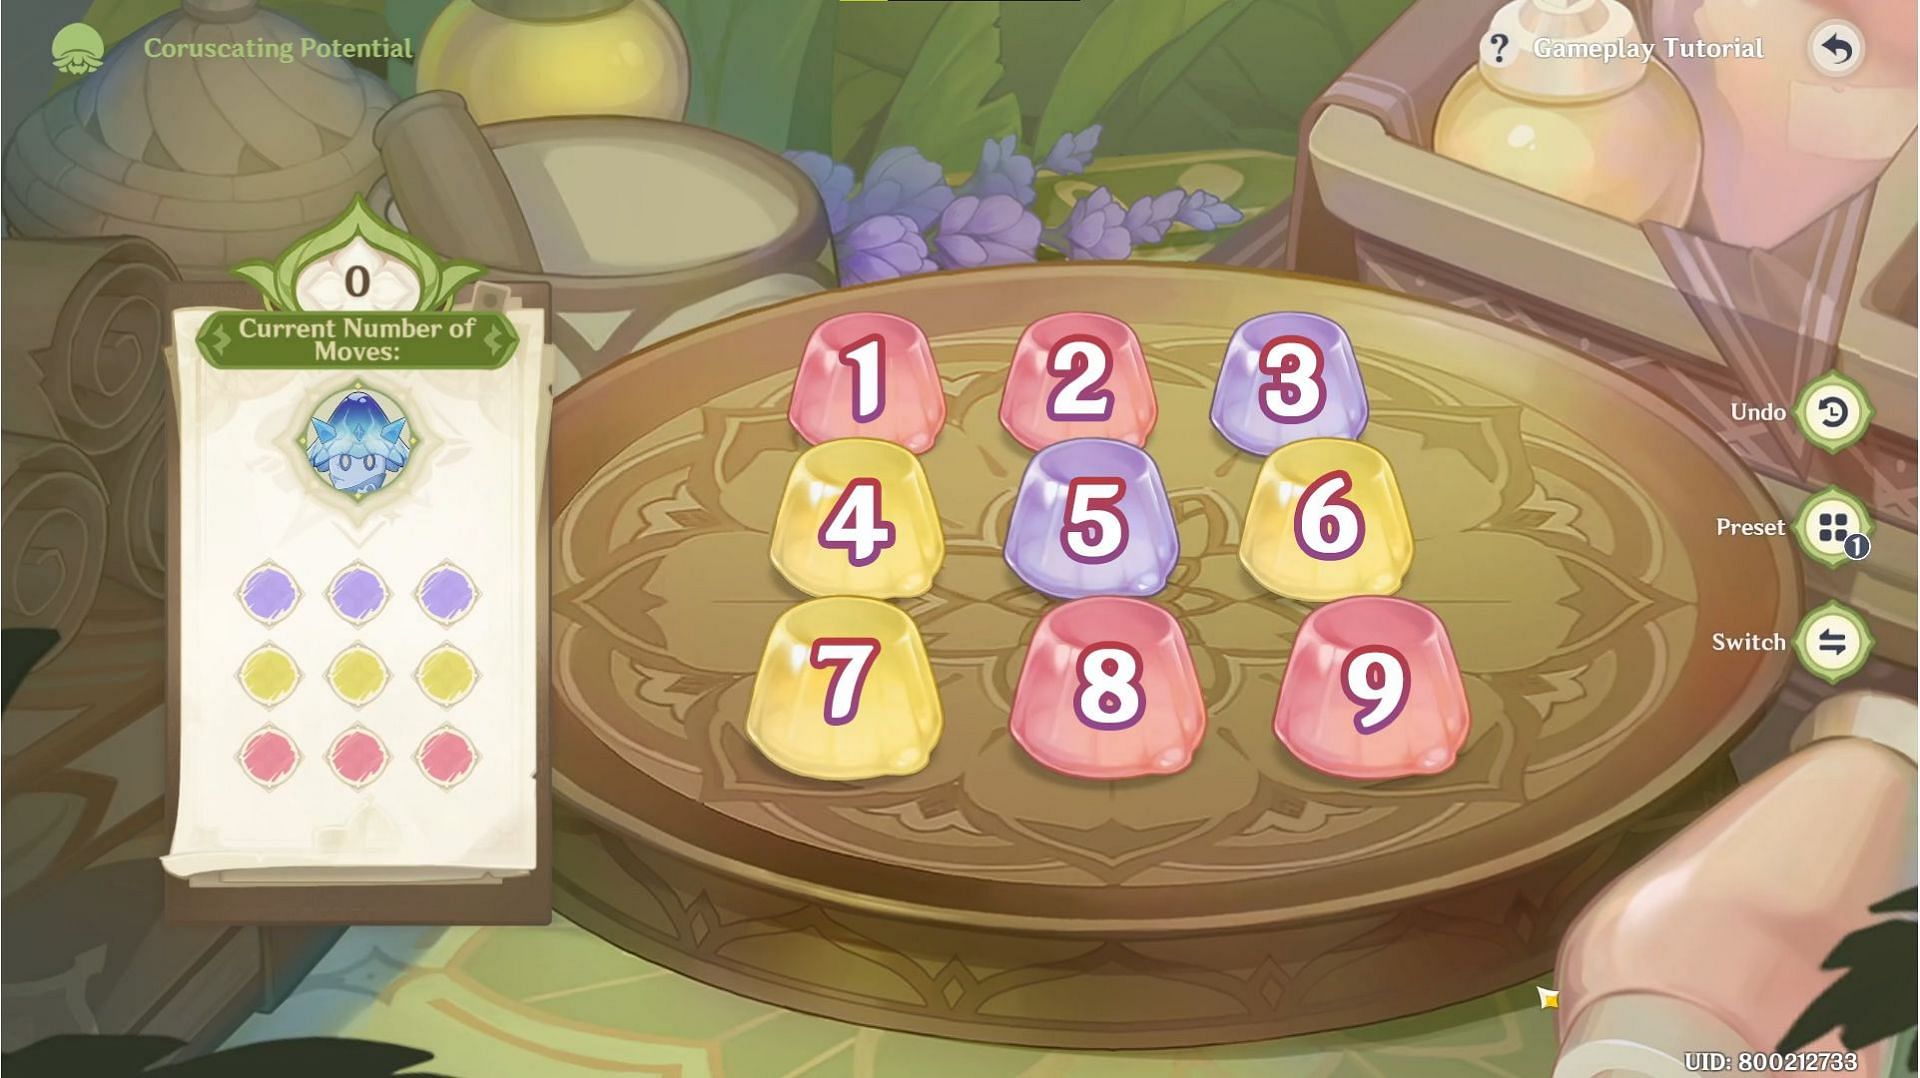 Floral Jelly puzzle for Whirling Cryo Fungus (Image via HoYoverse)